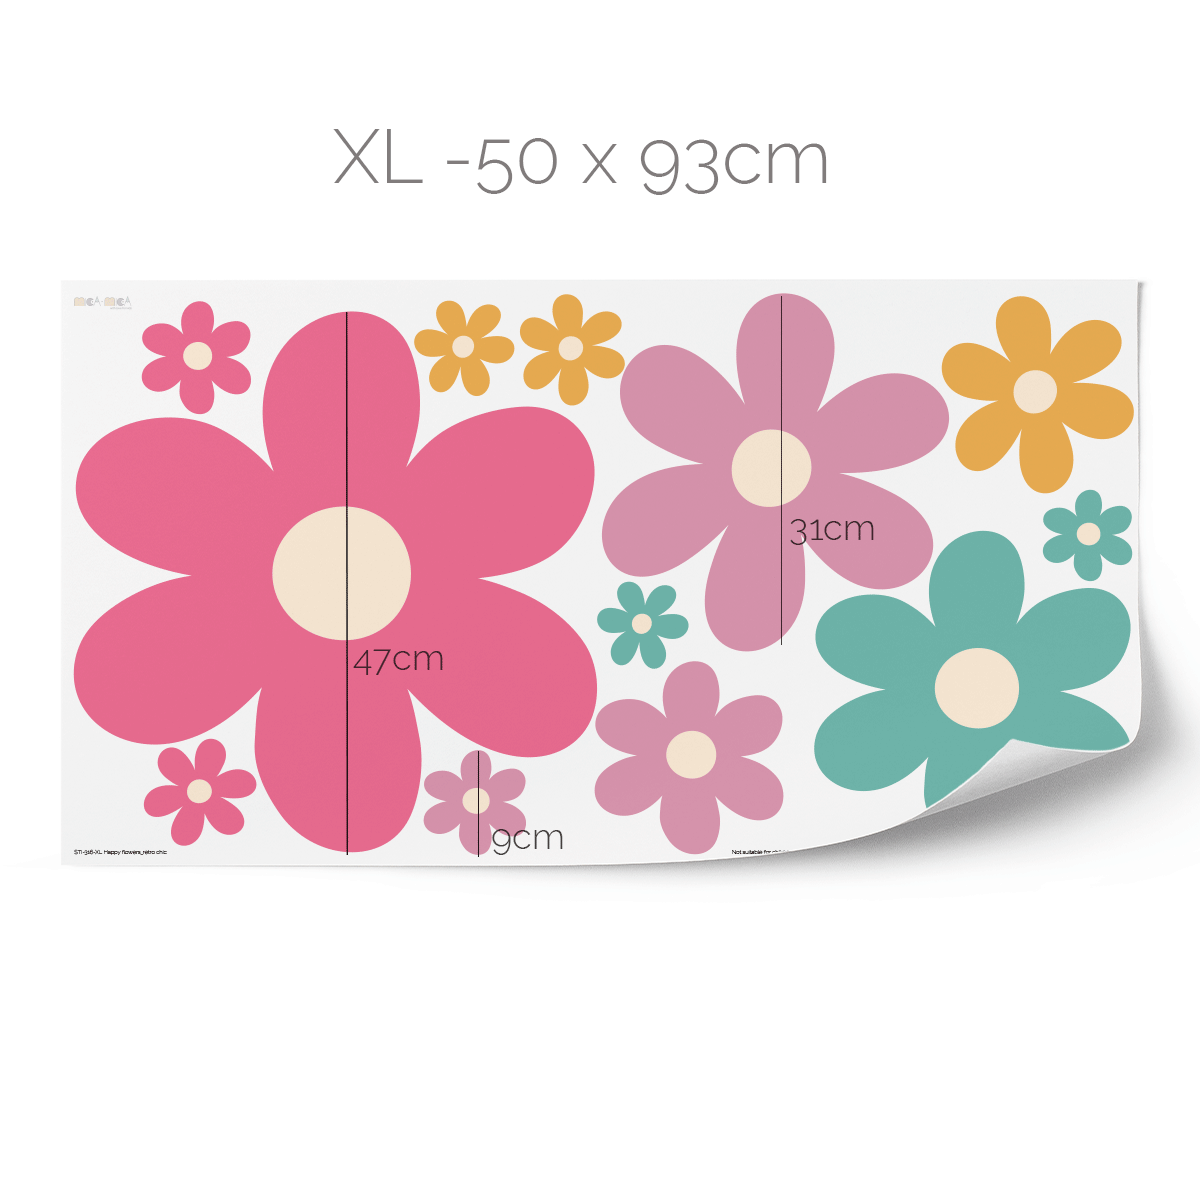 Flower wall stickers - Happy blooms (retro chic)